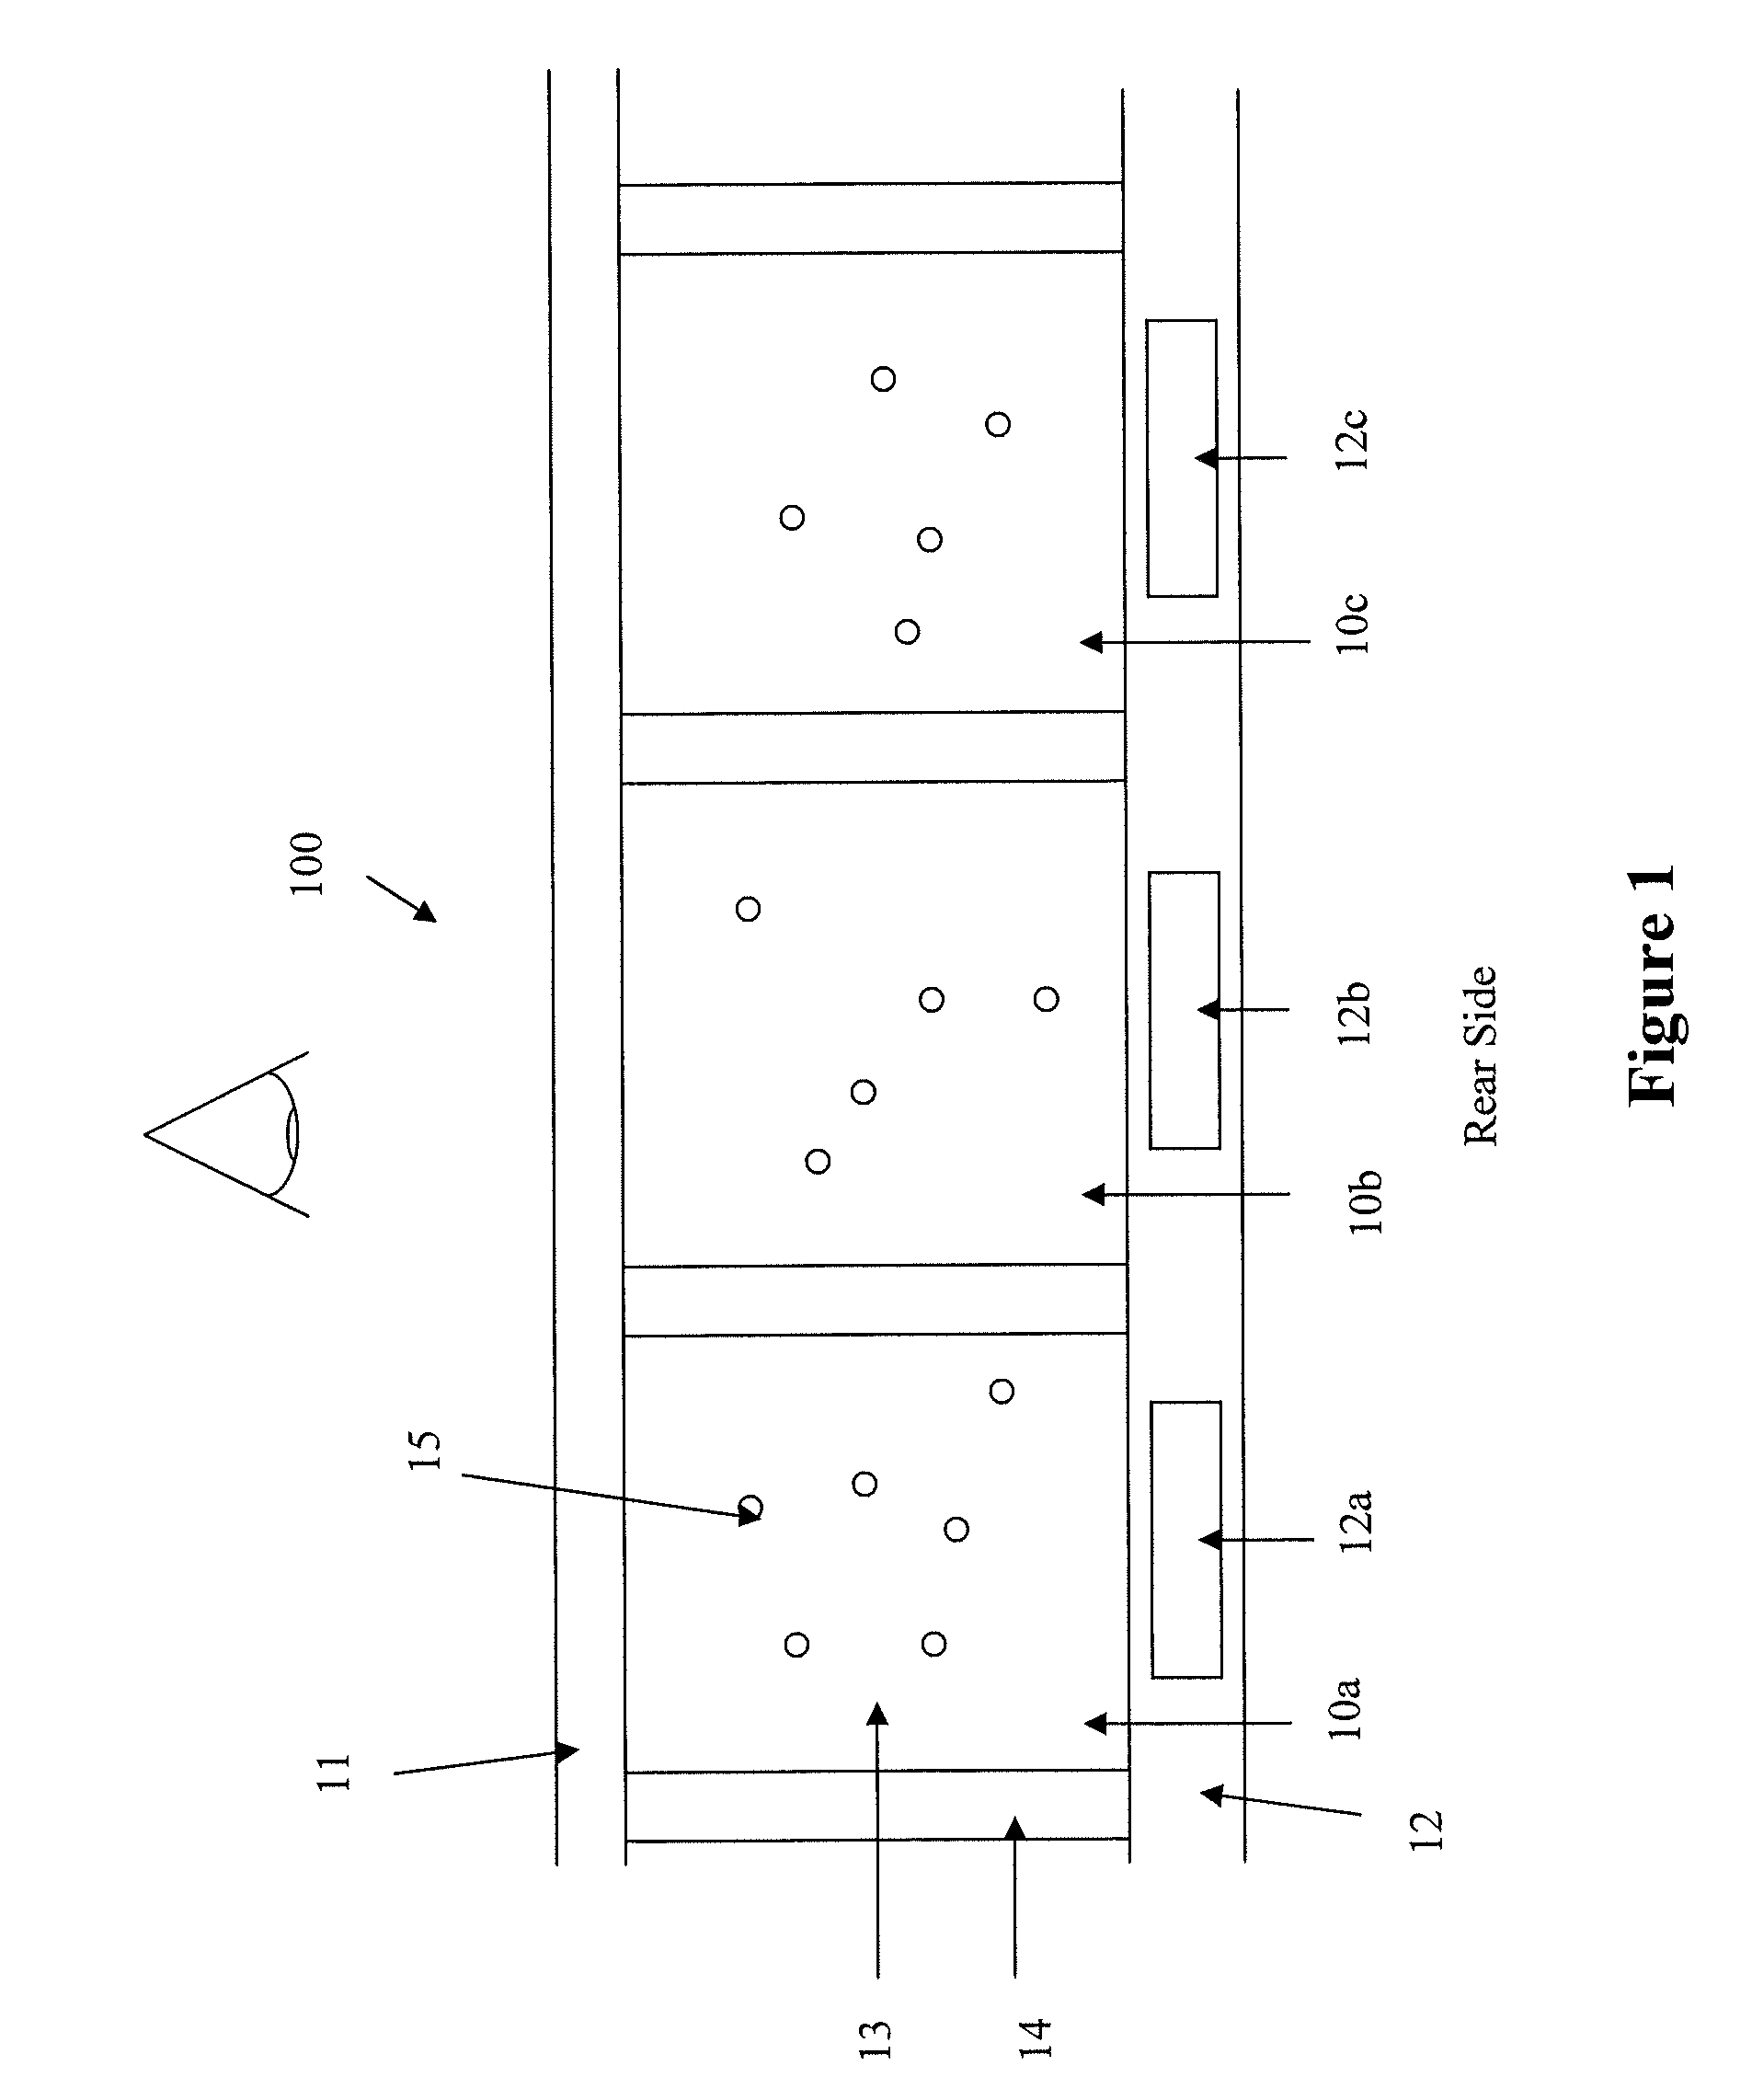 Spatially combined waveforms for electrophoretic displays